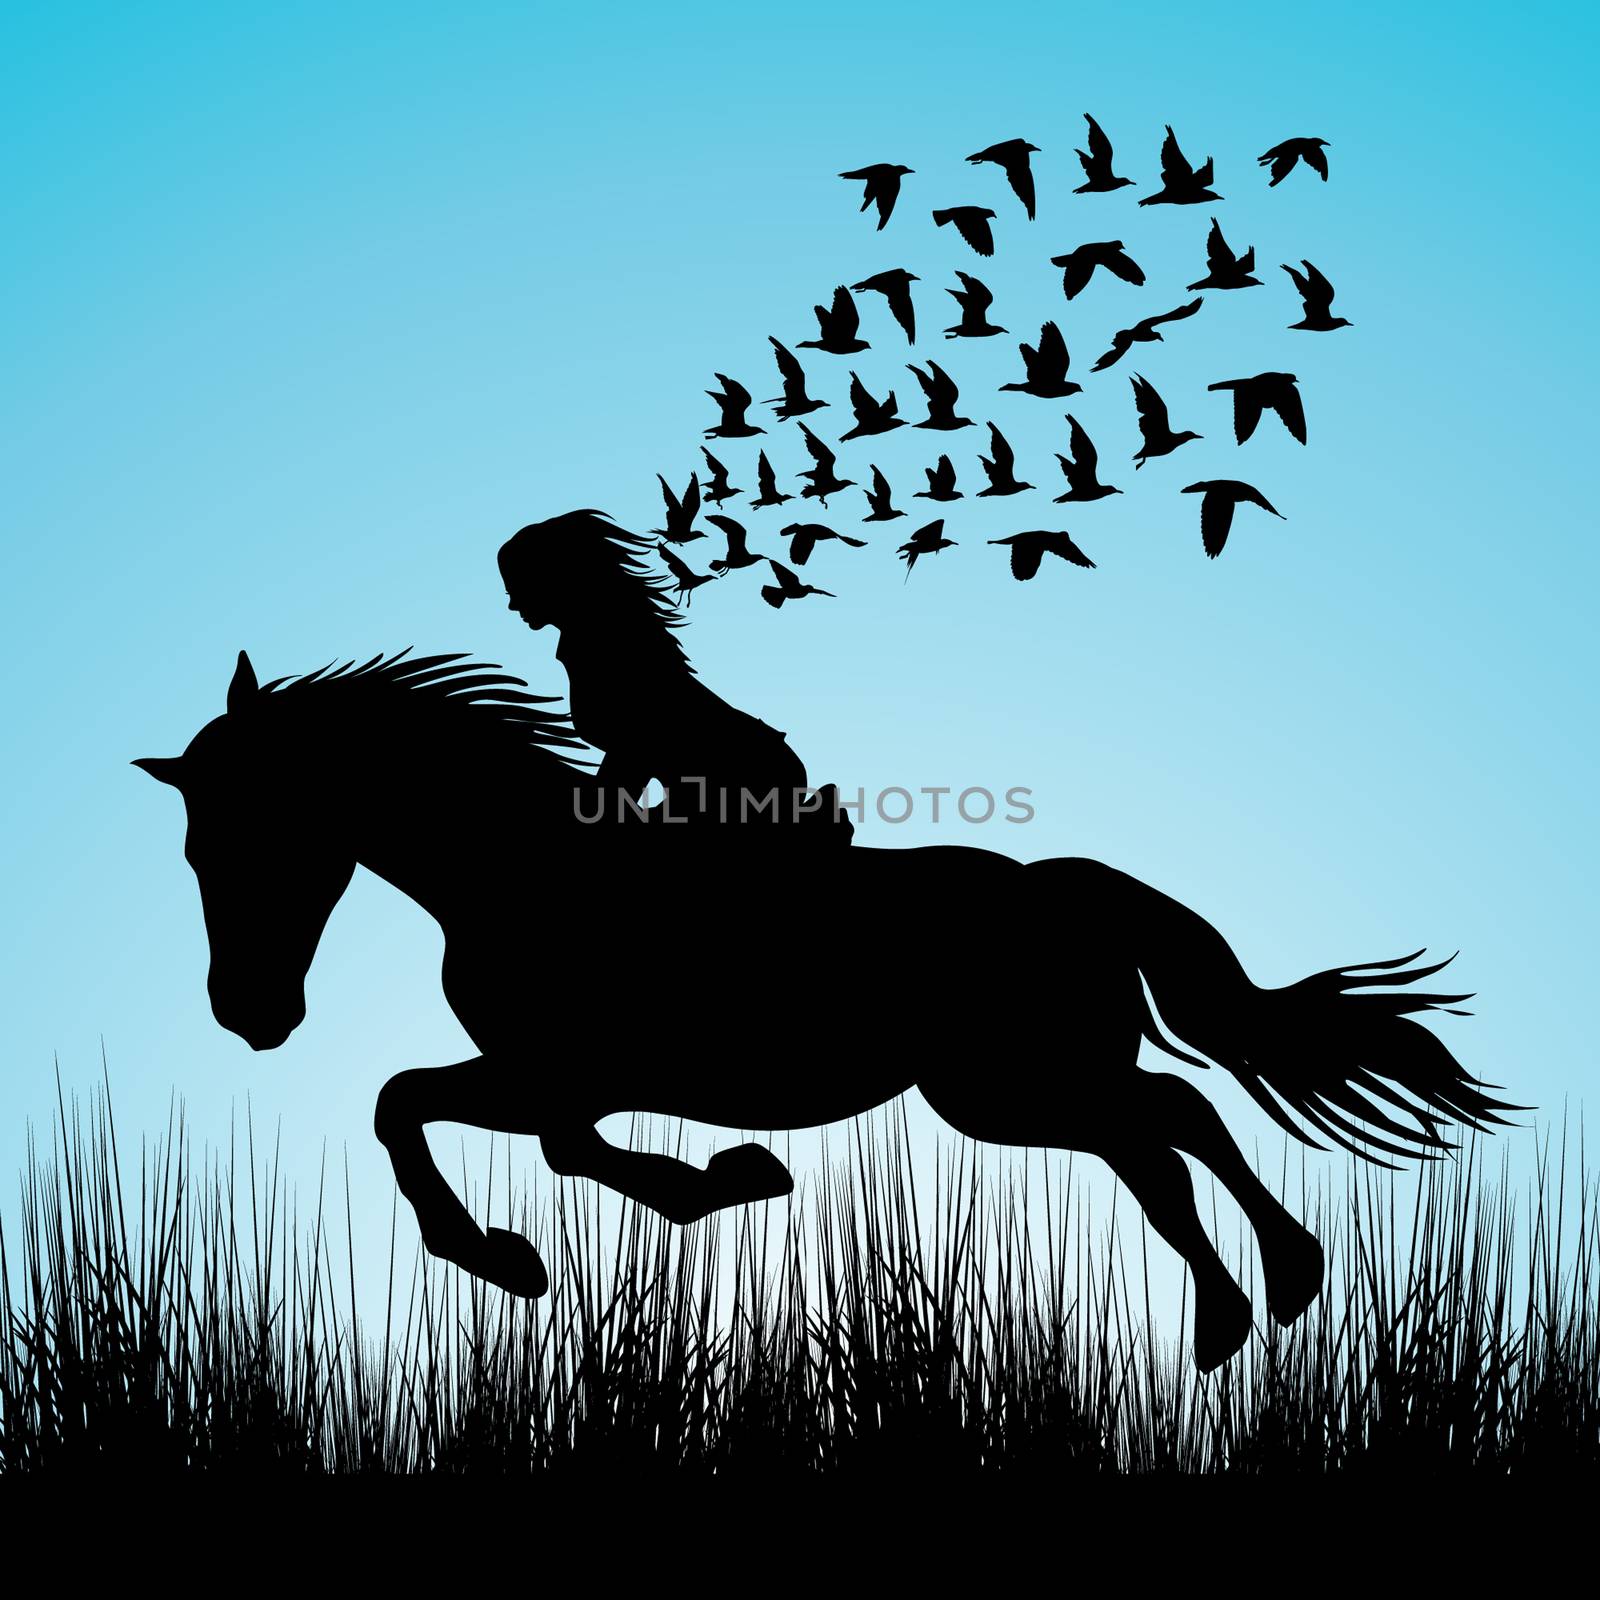 Illustration of woman riding a horse and birds flying by hibrida13